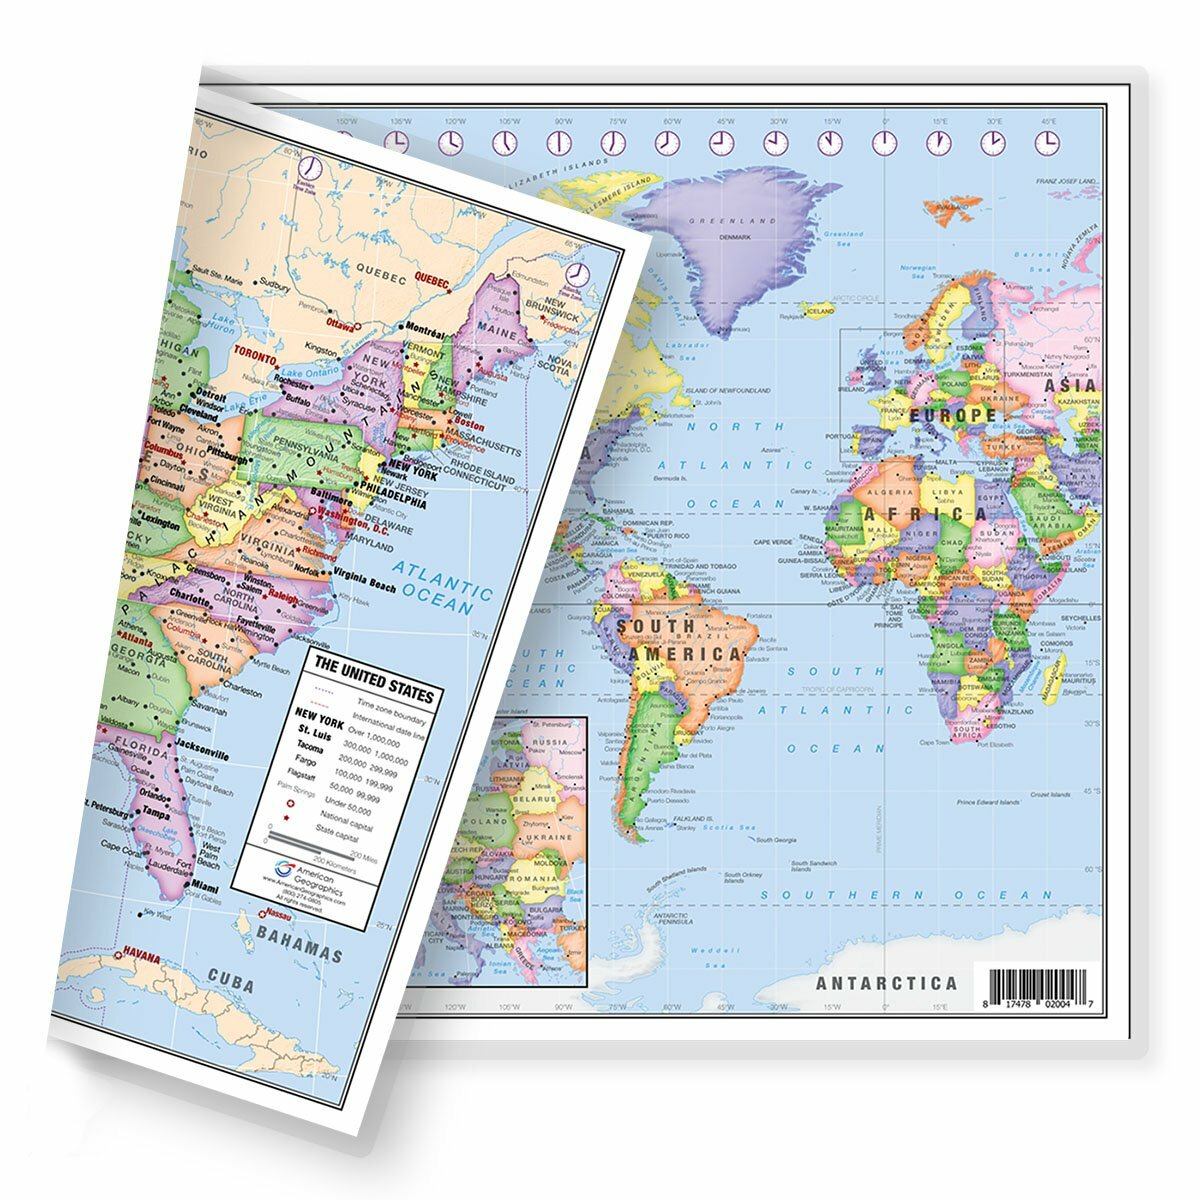 USA Map for Kids - Laminated - United States Wall Chart Map (18 x 24)